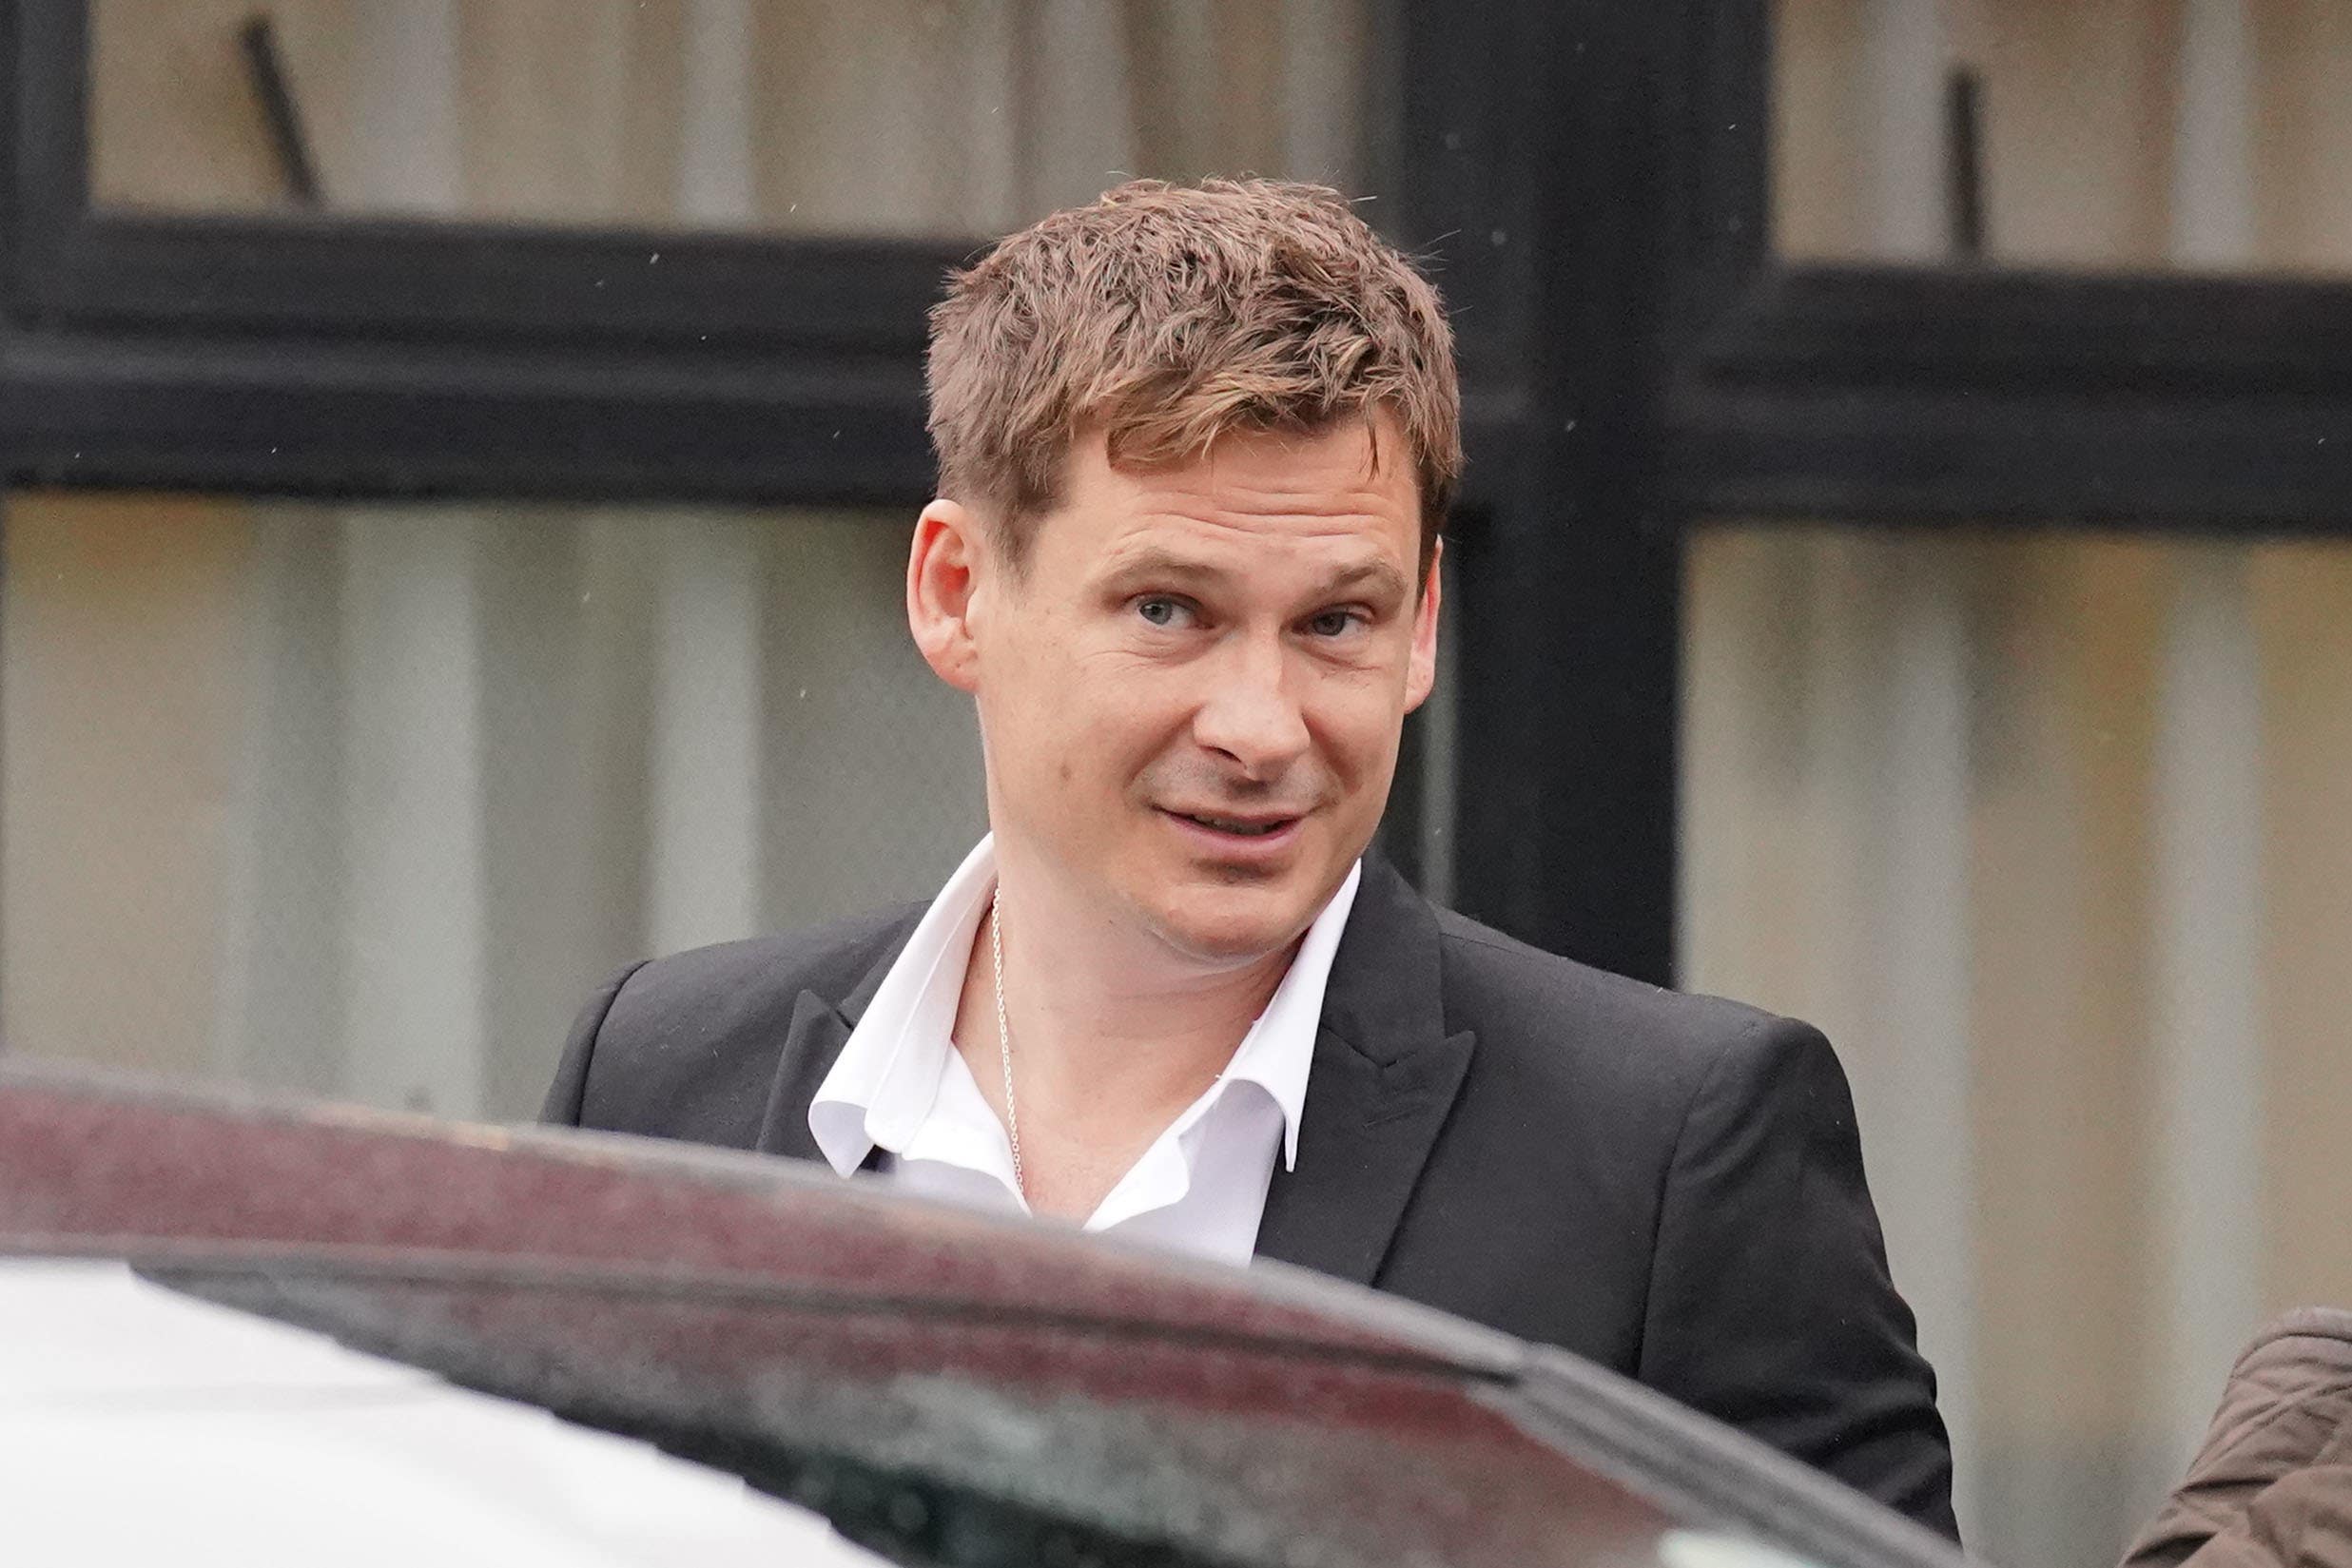 Lee Ryan claims he was given bad advice about pleading guilty to biting the police officer